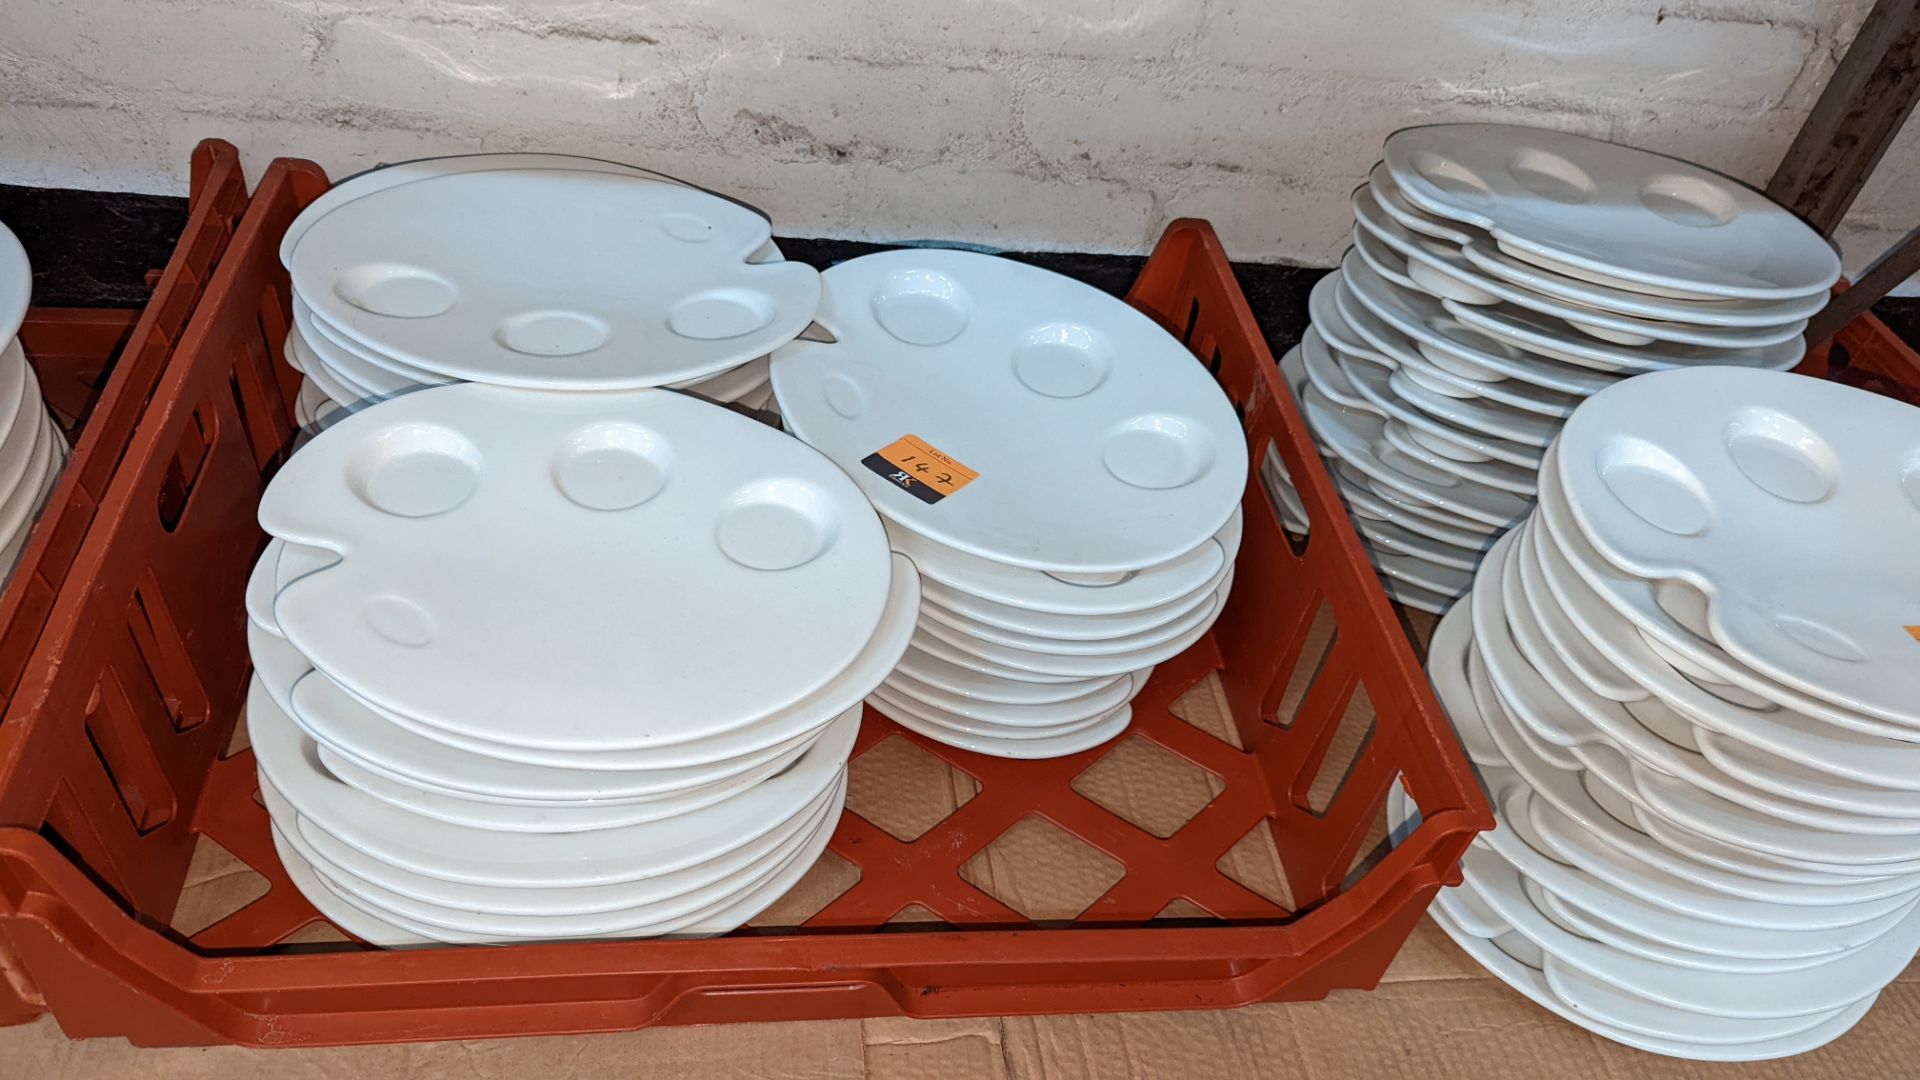 30 off Dudson artist's palette style plates/dishes, each measuring approximately 305mm x 250mm